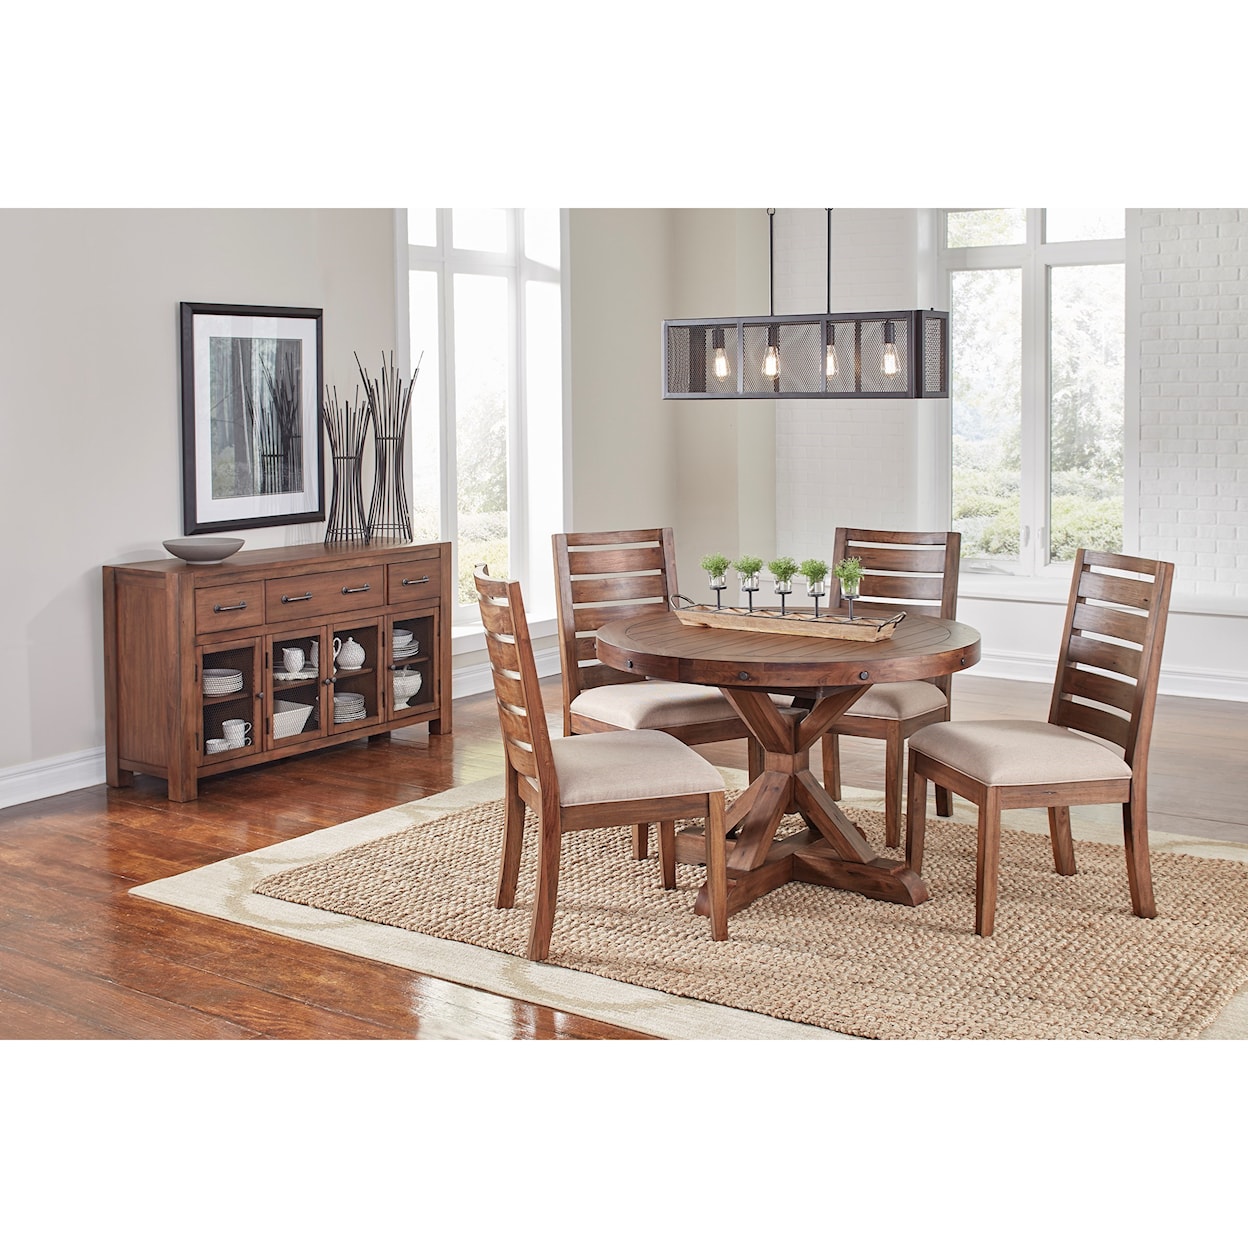 AAmerica Anacortes Dining Room Group